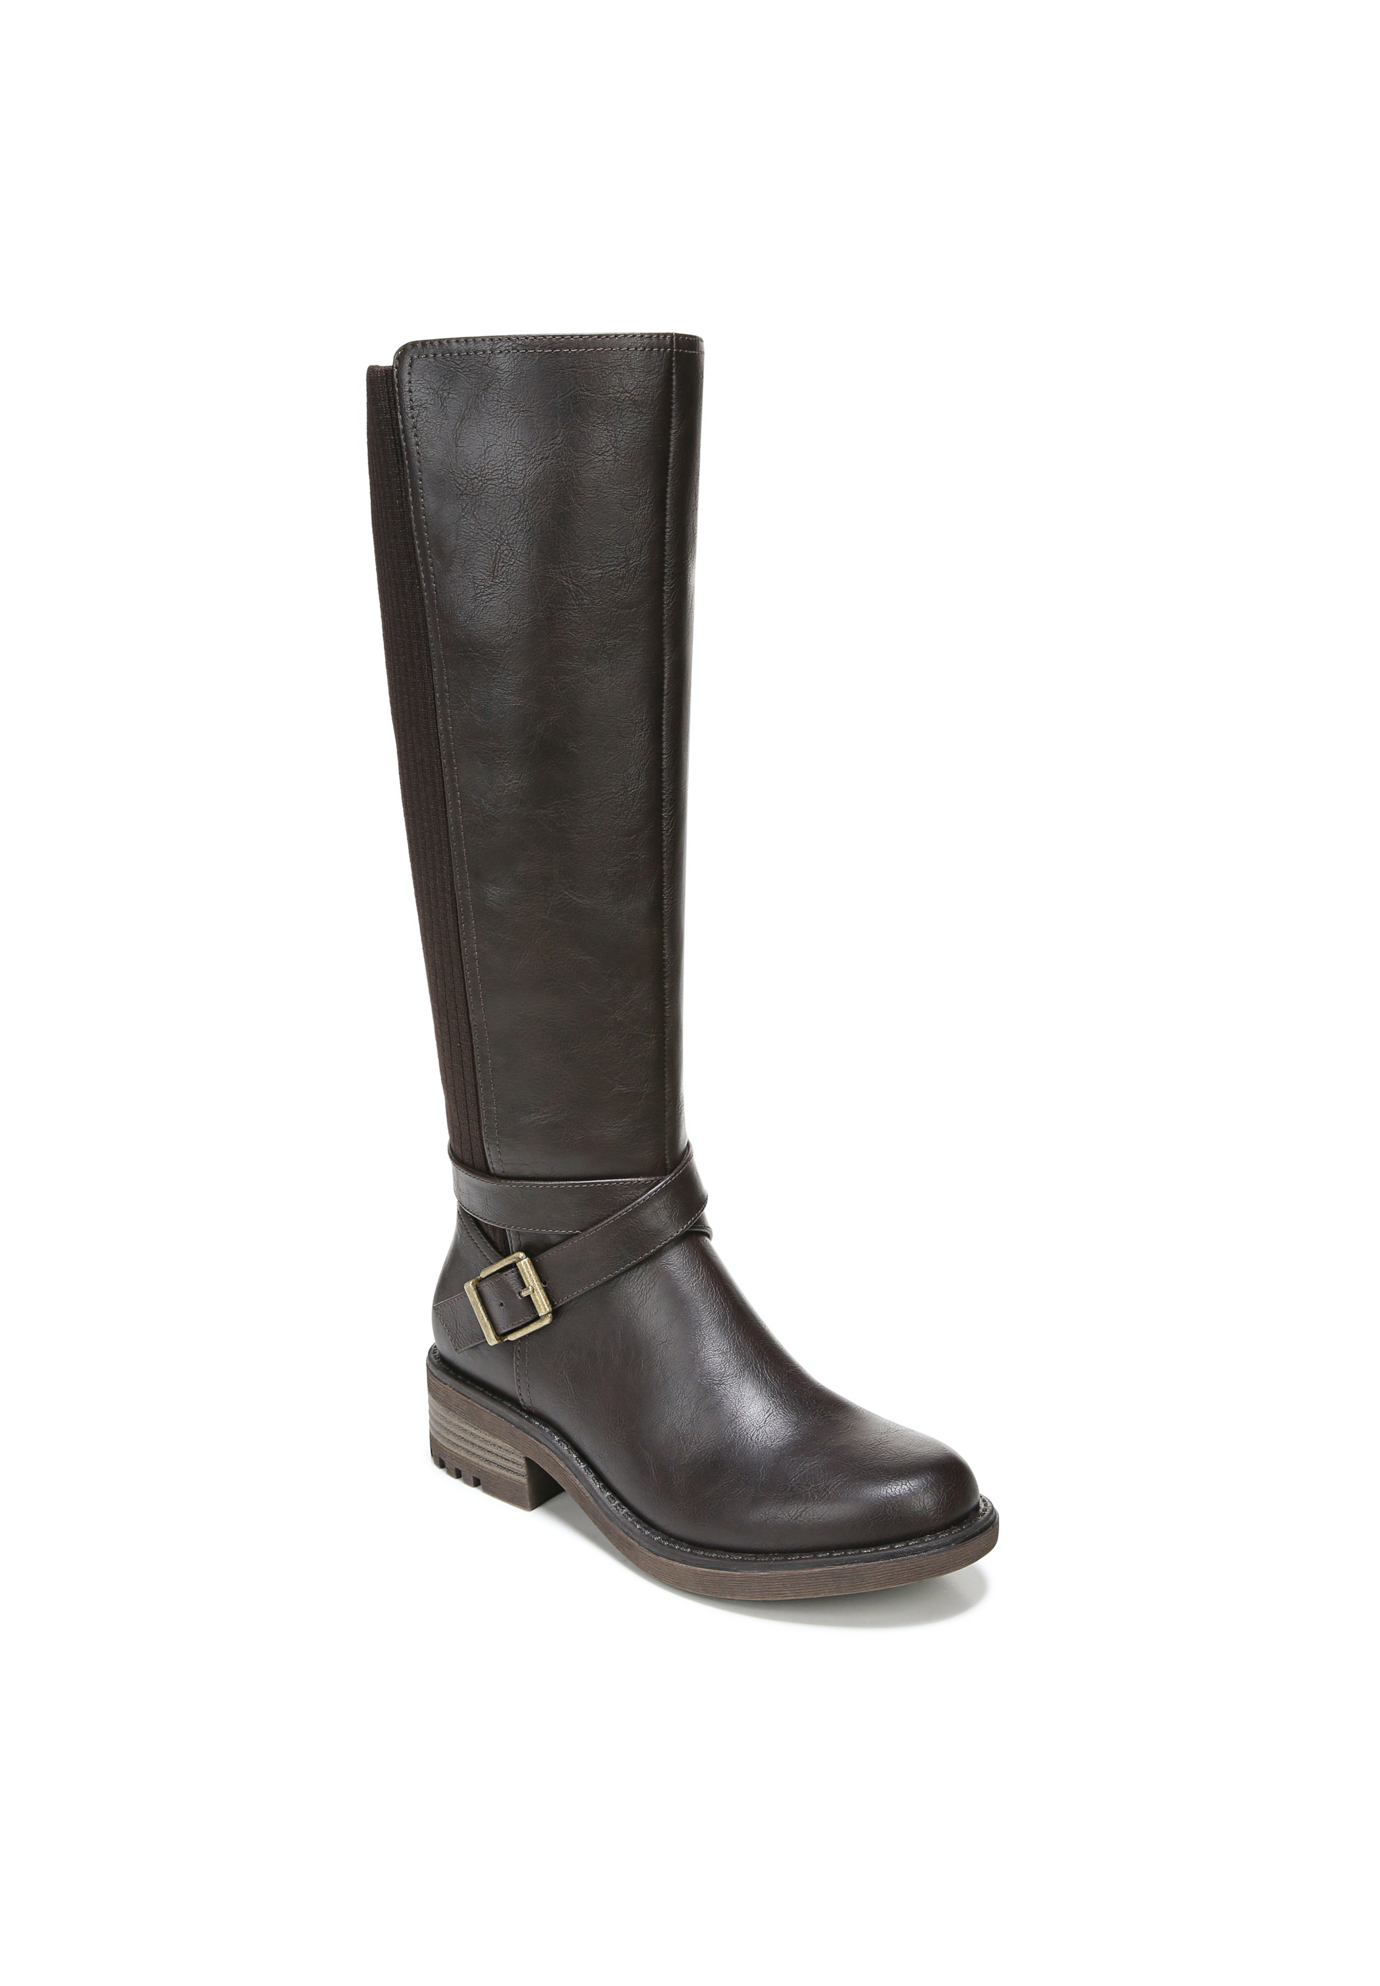 Karter Water Resistant Riding Boot, 